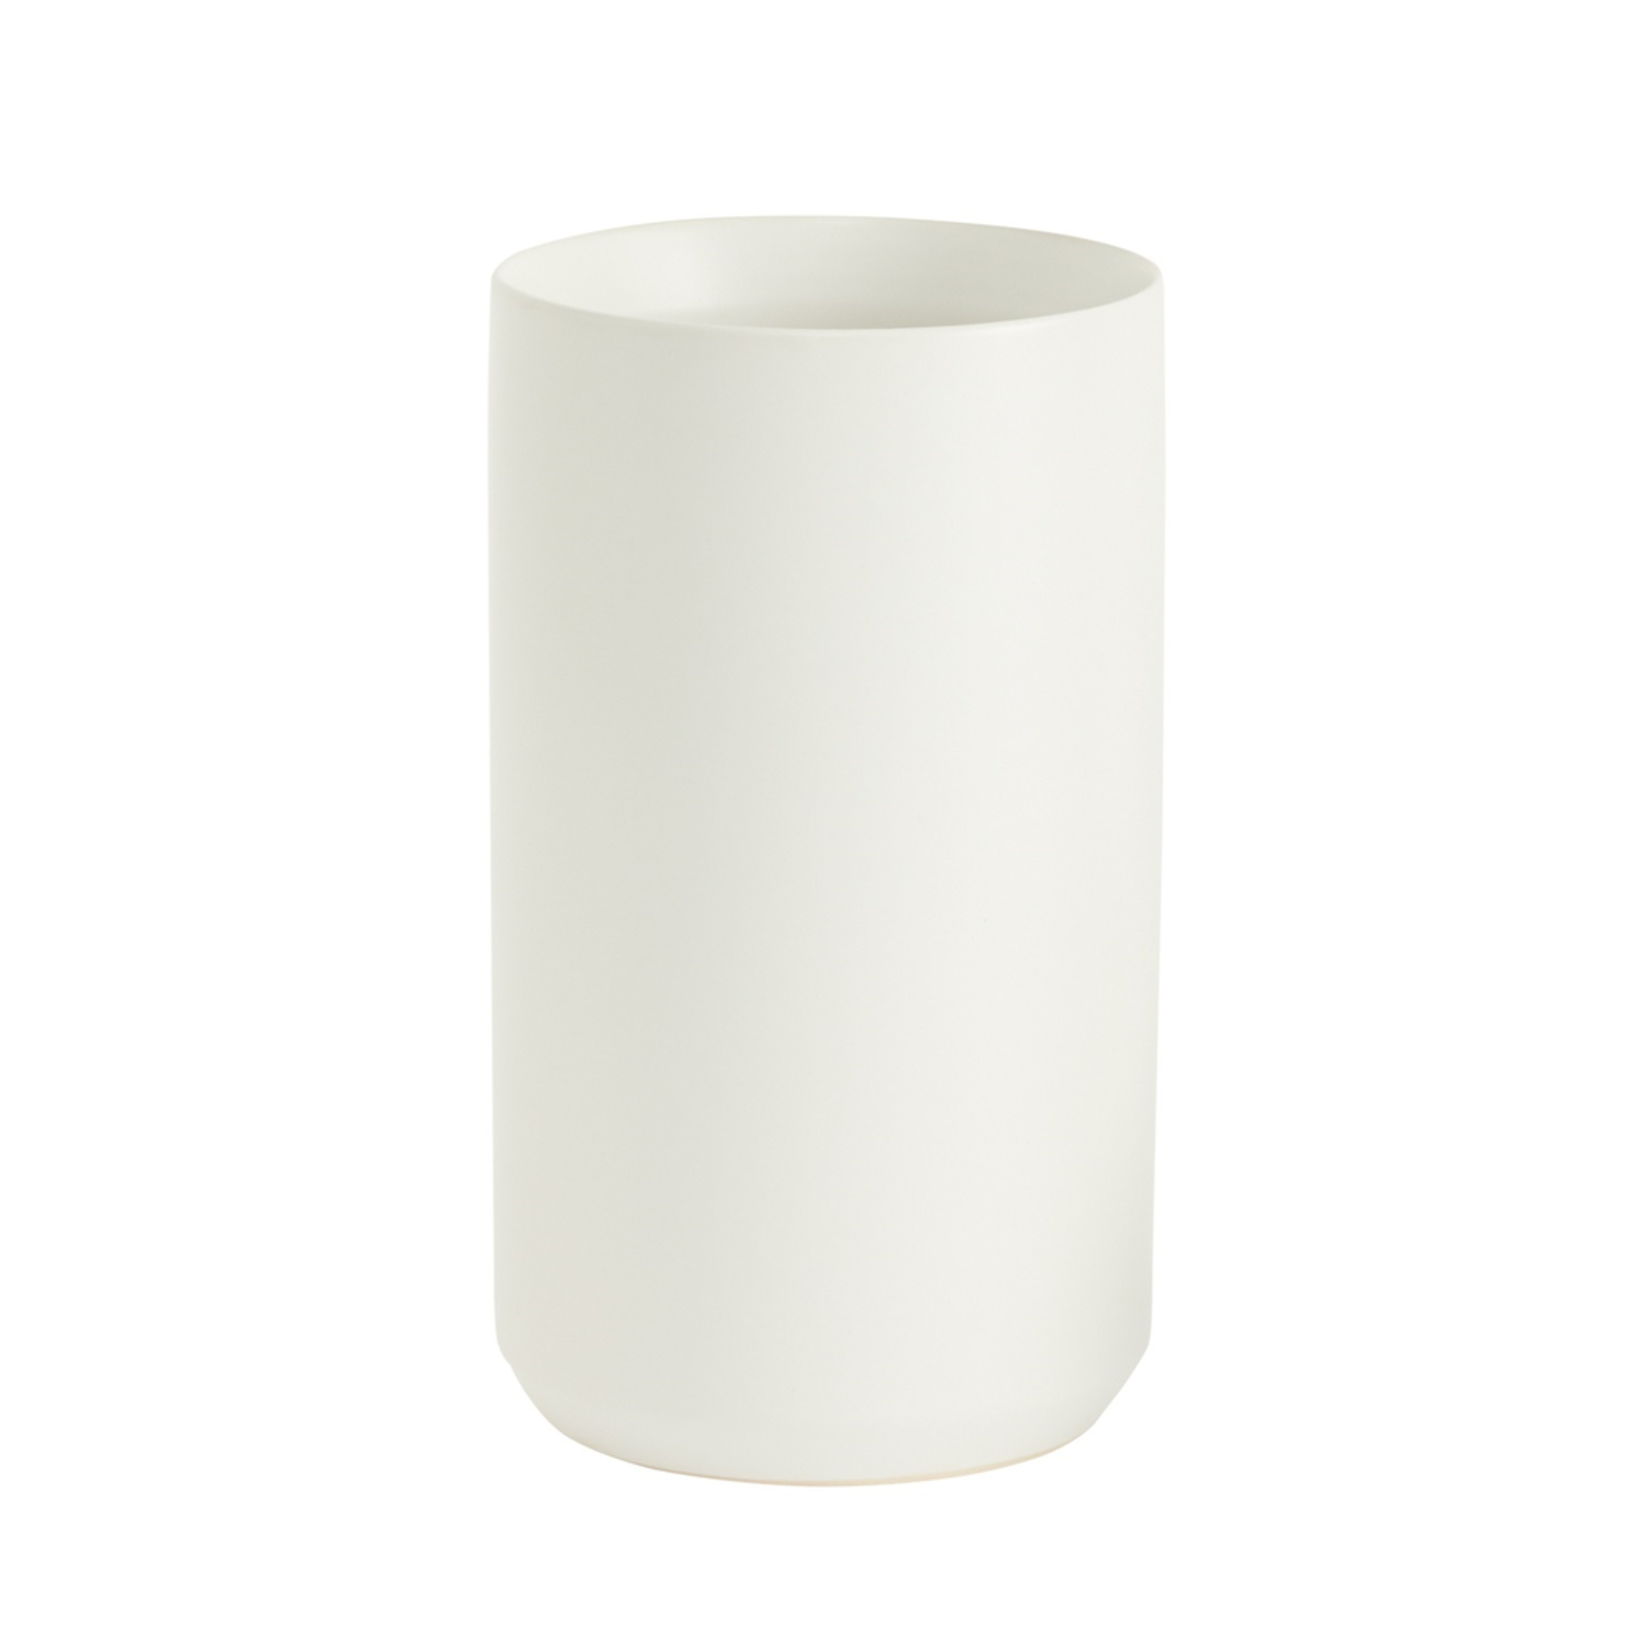 8”H X 4.5” WHITE  KENDALL VASE COLLECTION (AD)